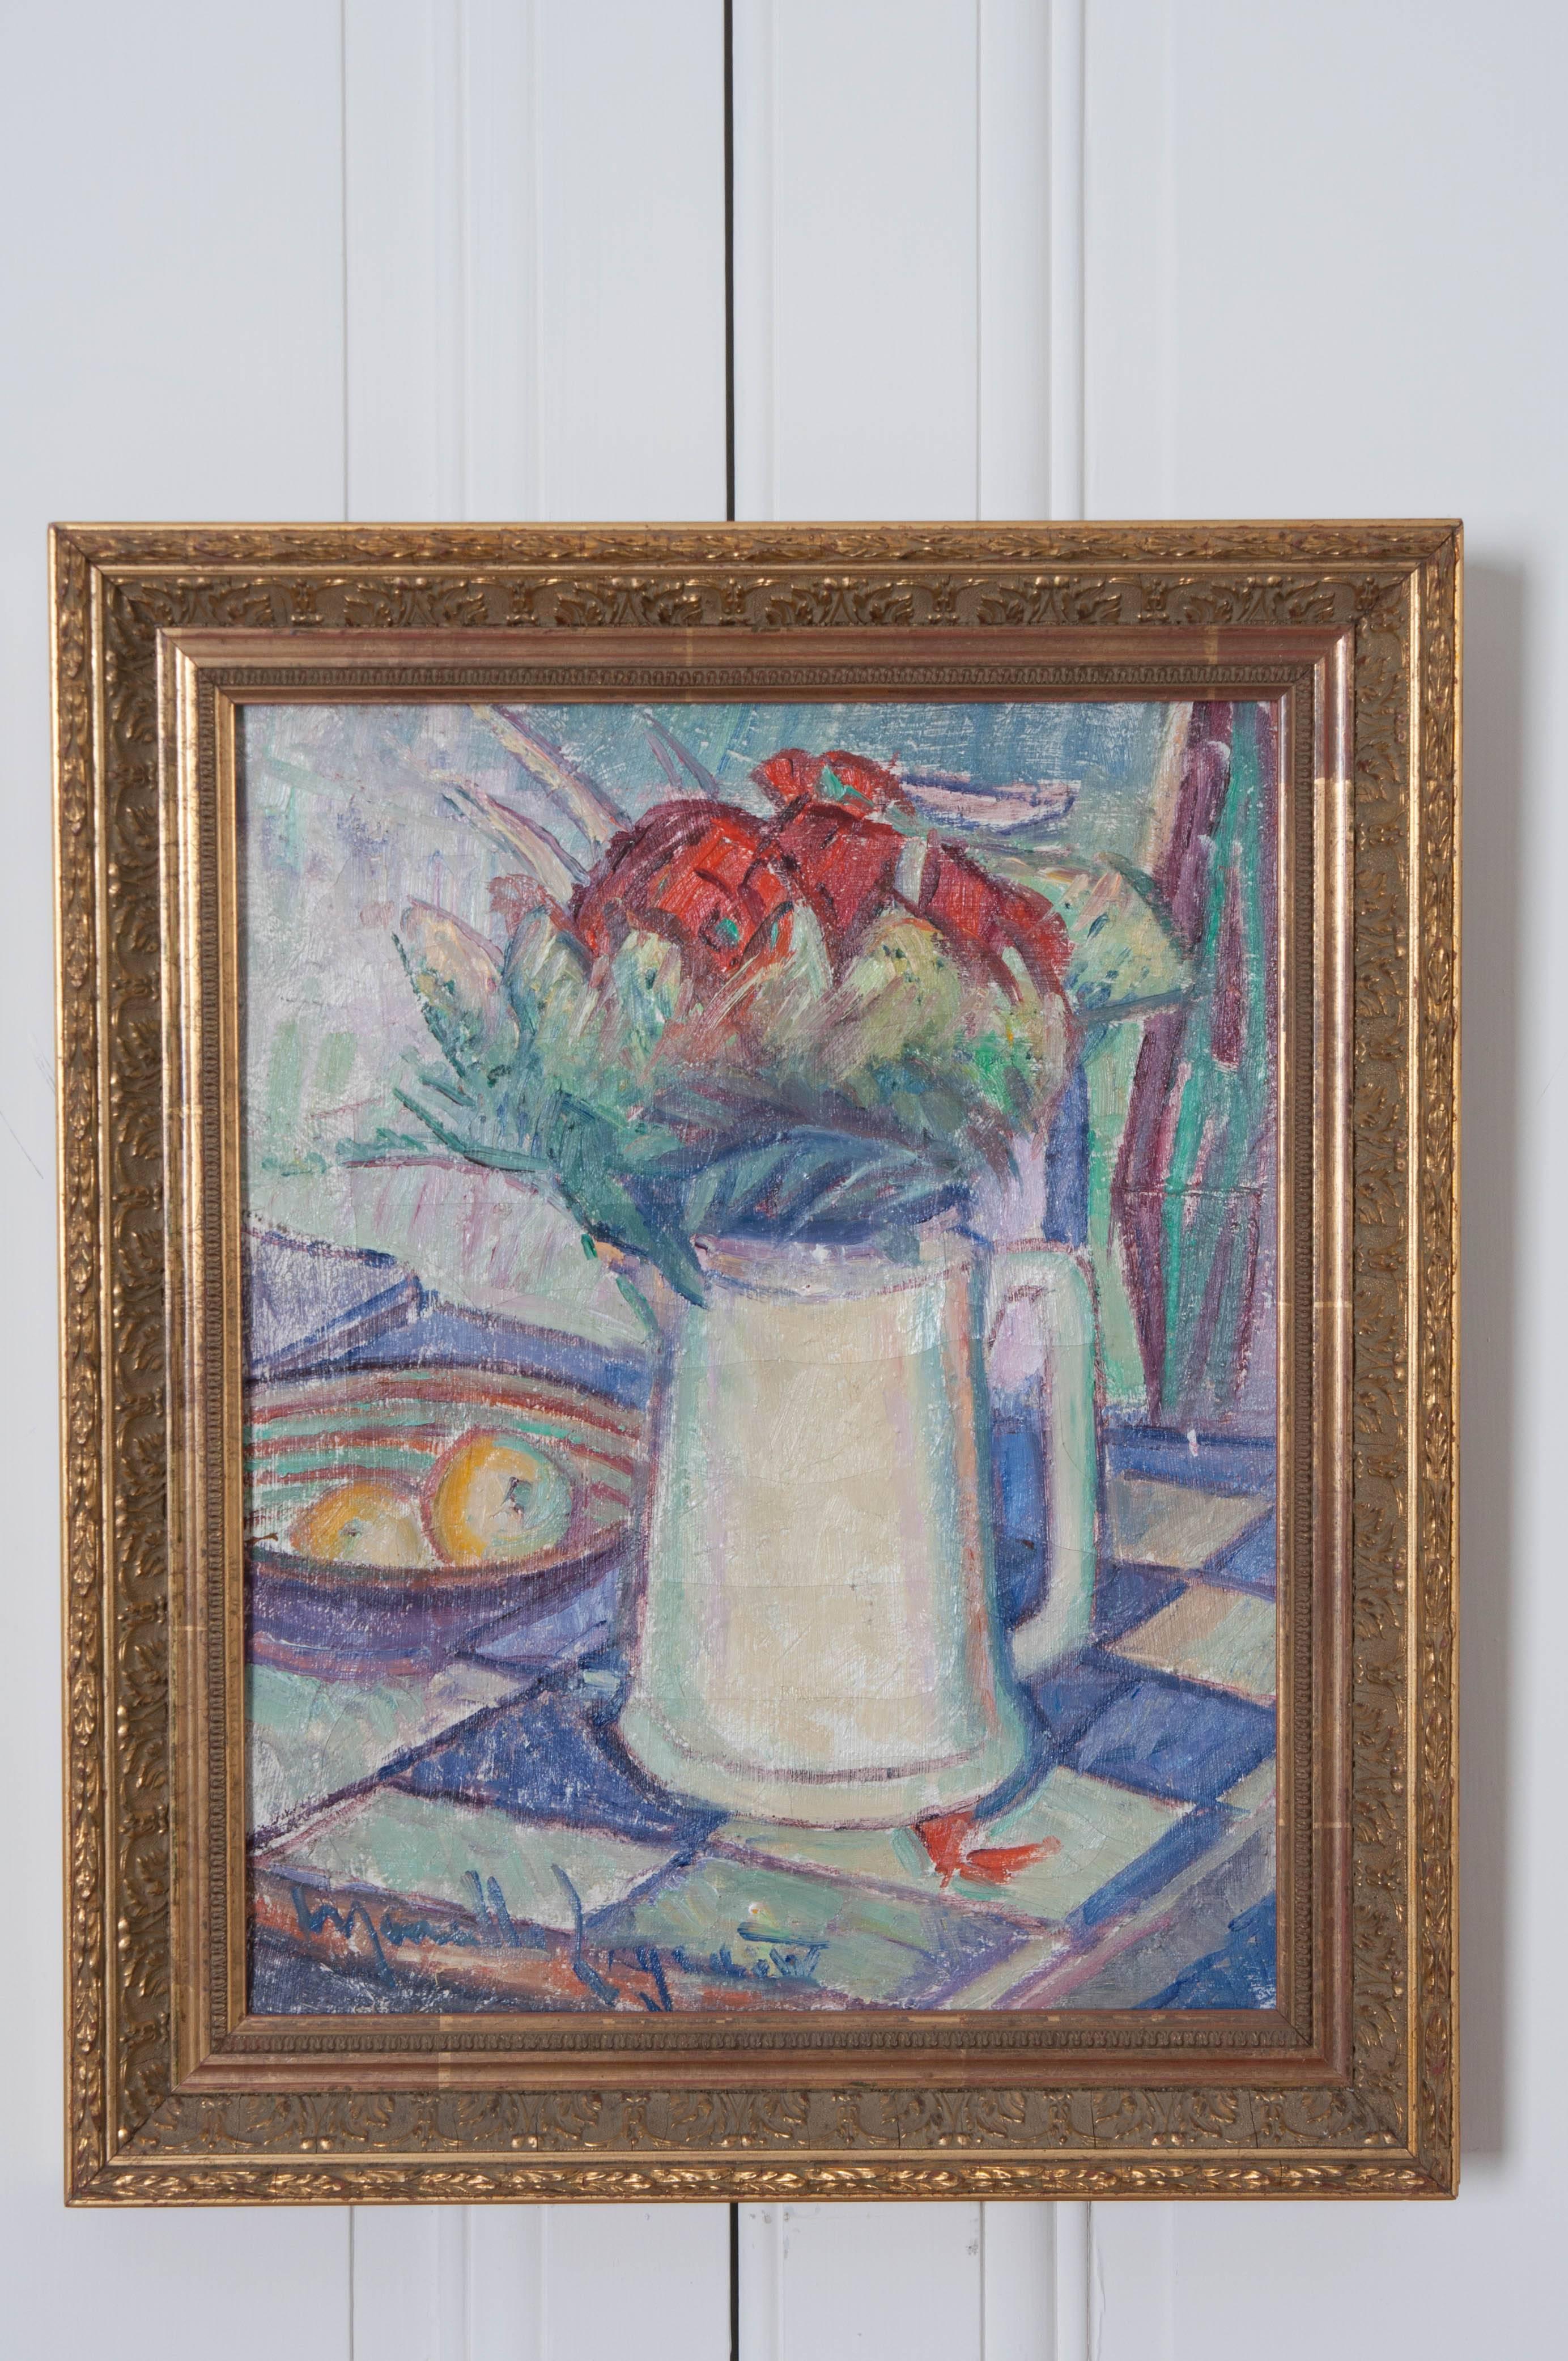 A colorful antique oil painting from the end of the 19th century, France. The work exhibits a pitcher on a checkered counter or tabletop, full of flowers. A bowl containing fruit is at its side. The piece is set in a remarkable gold gilt frame that